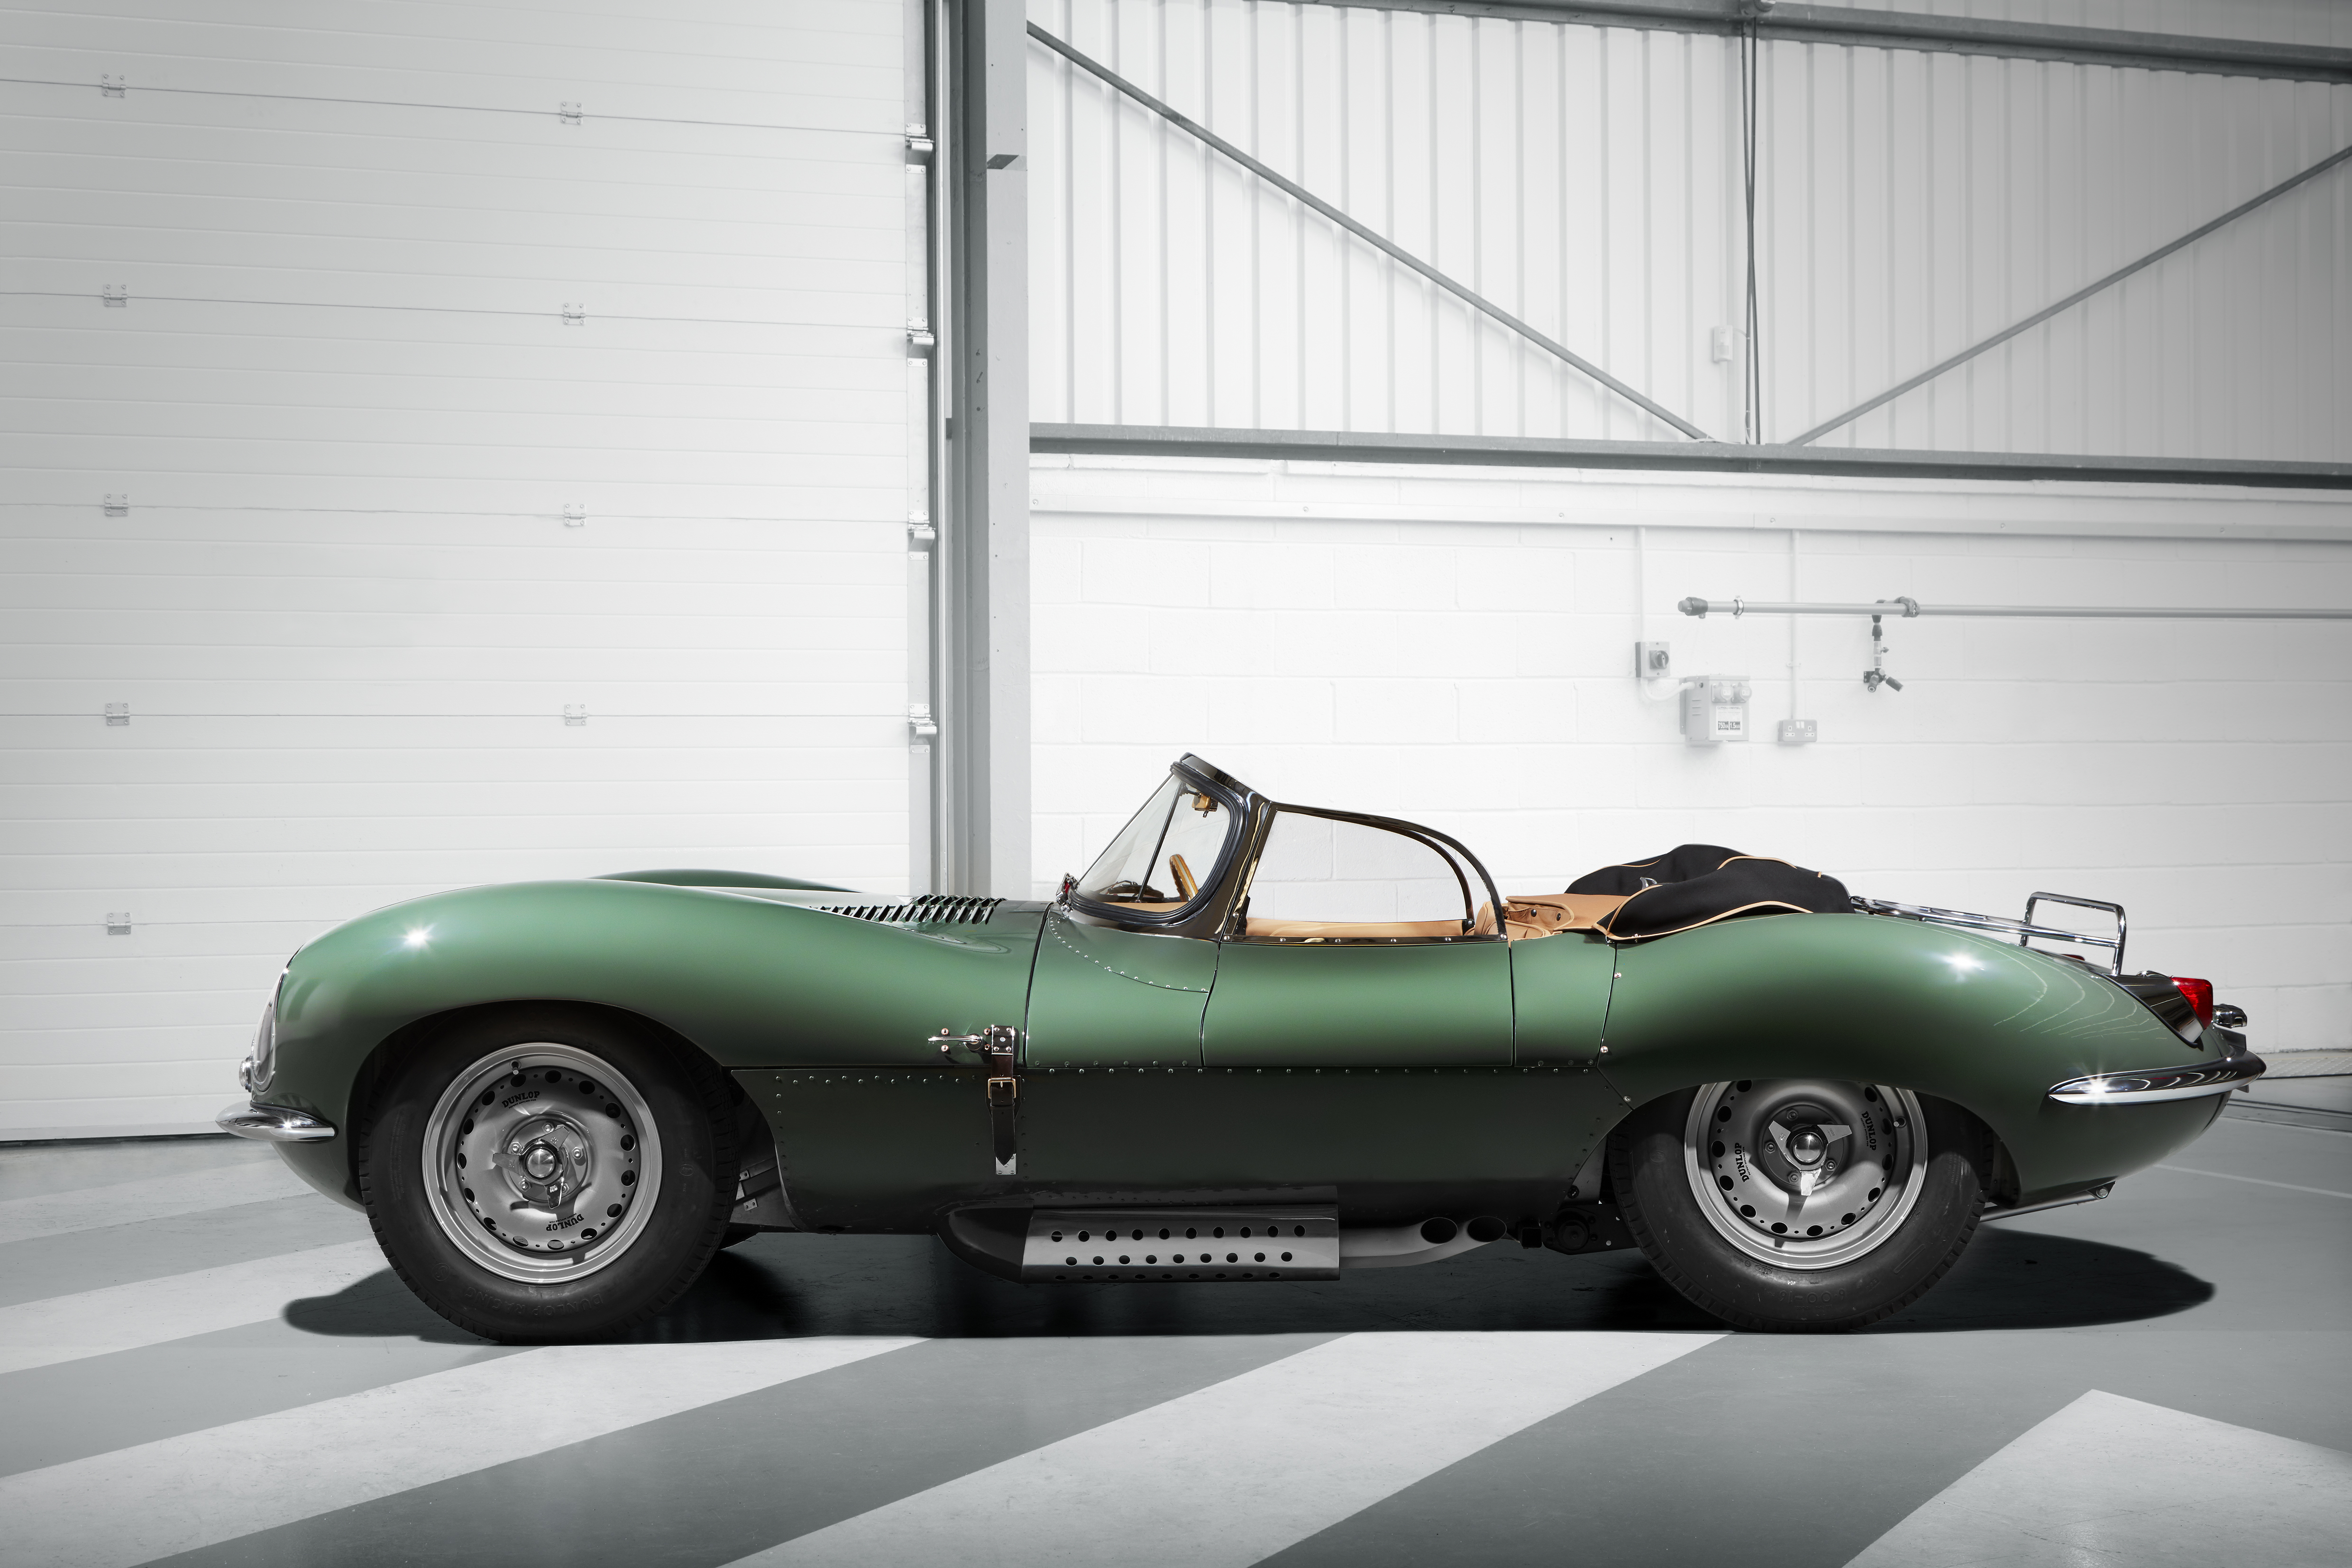 Jaguar builds limited run editions of the XKSS